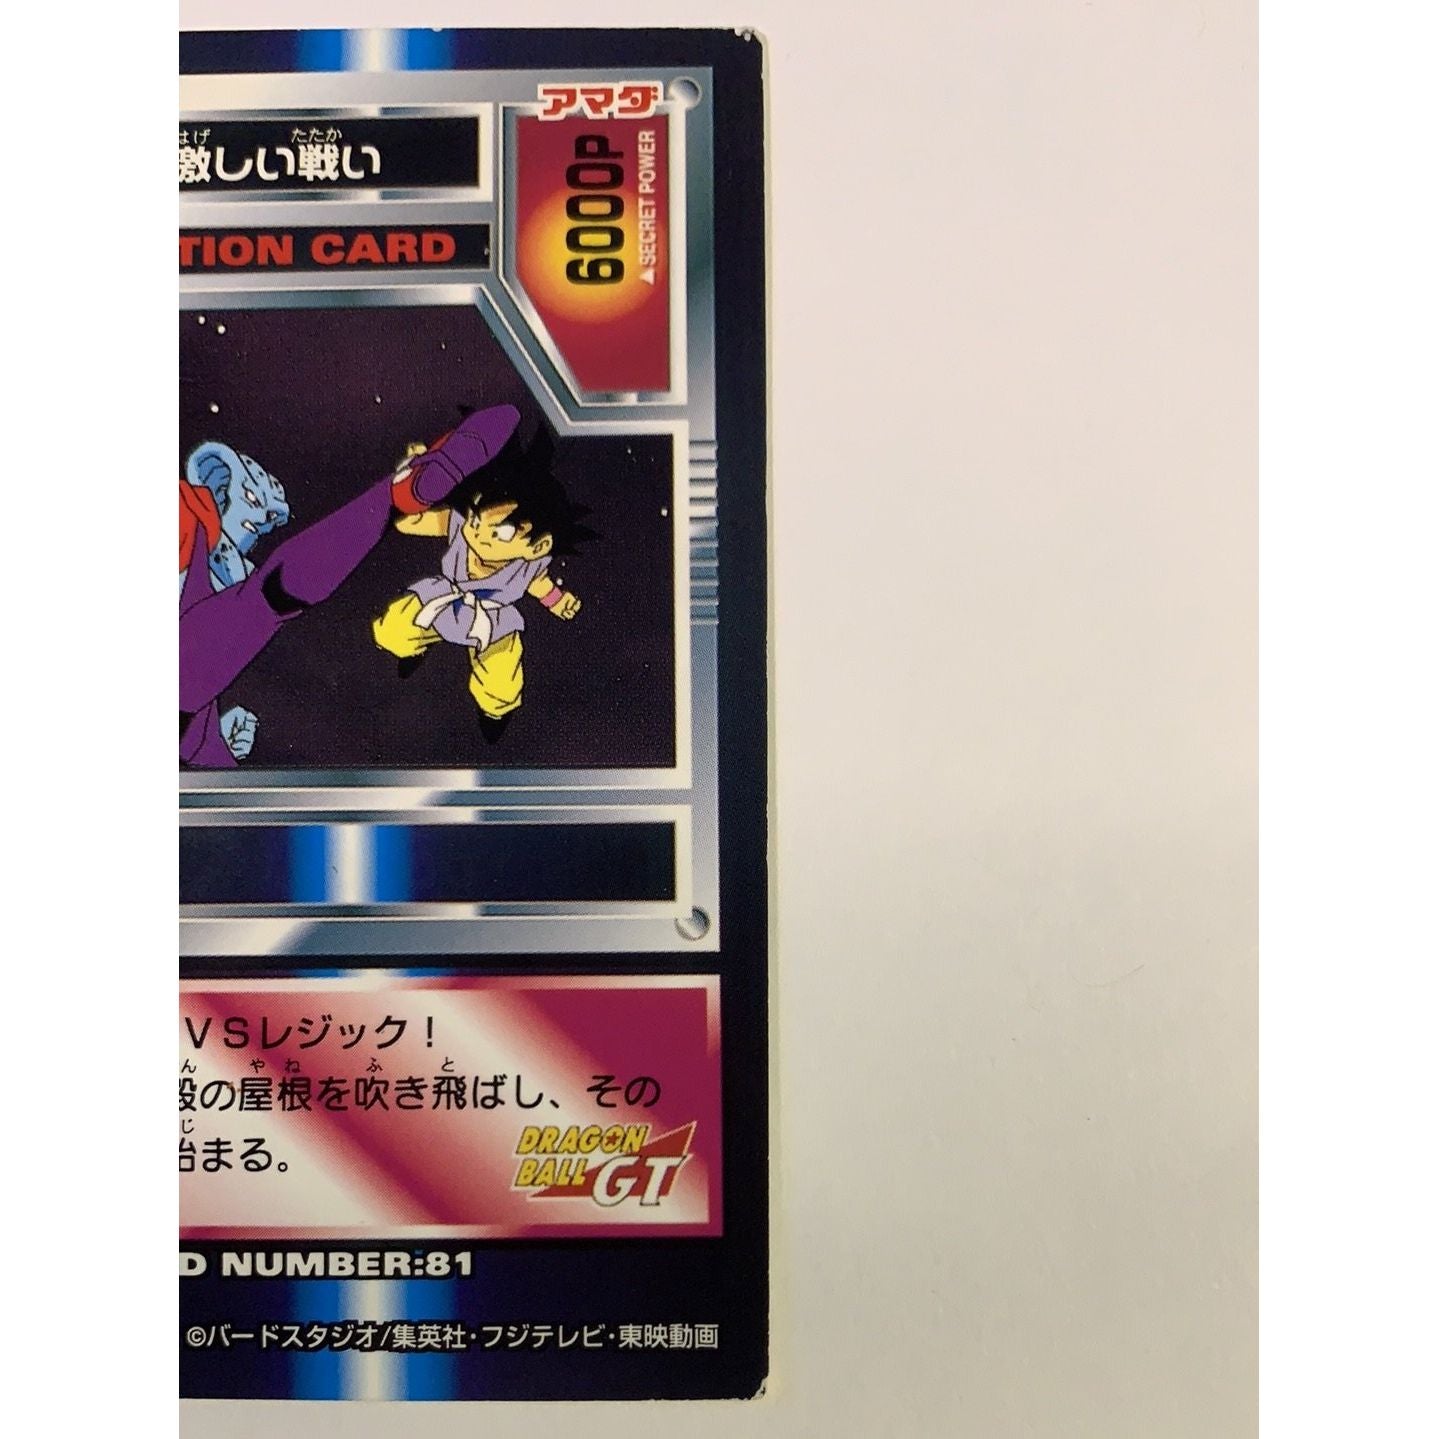  1996 Dragon Ball GT Japanese Character Card Ledgic Vs Goku #81  Local Legends Cards & Collectibles